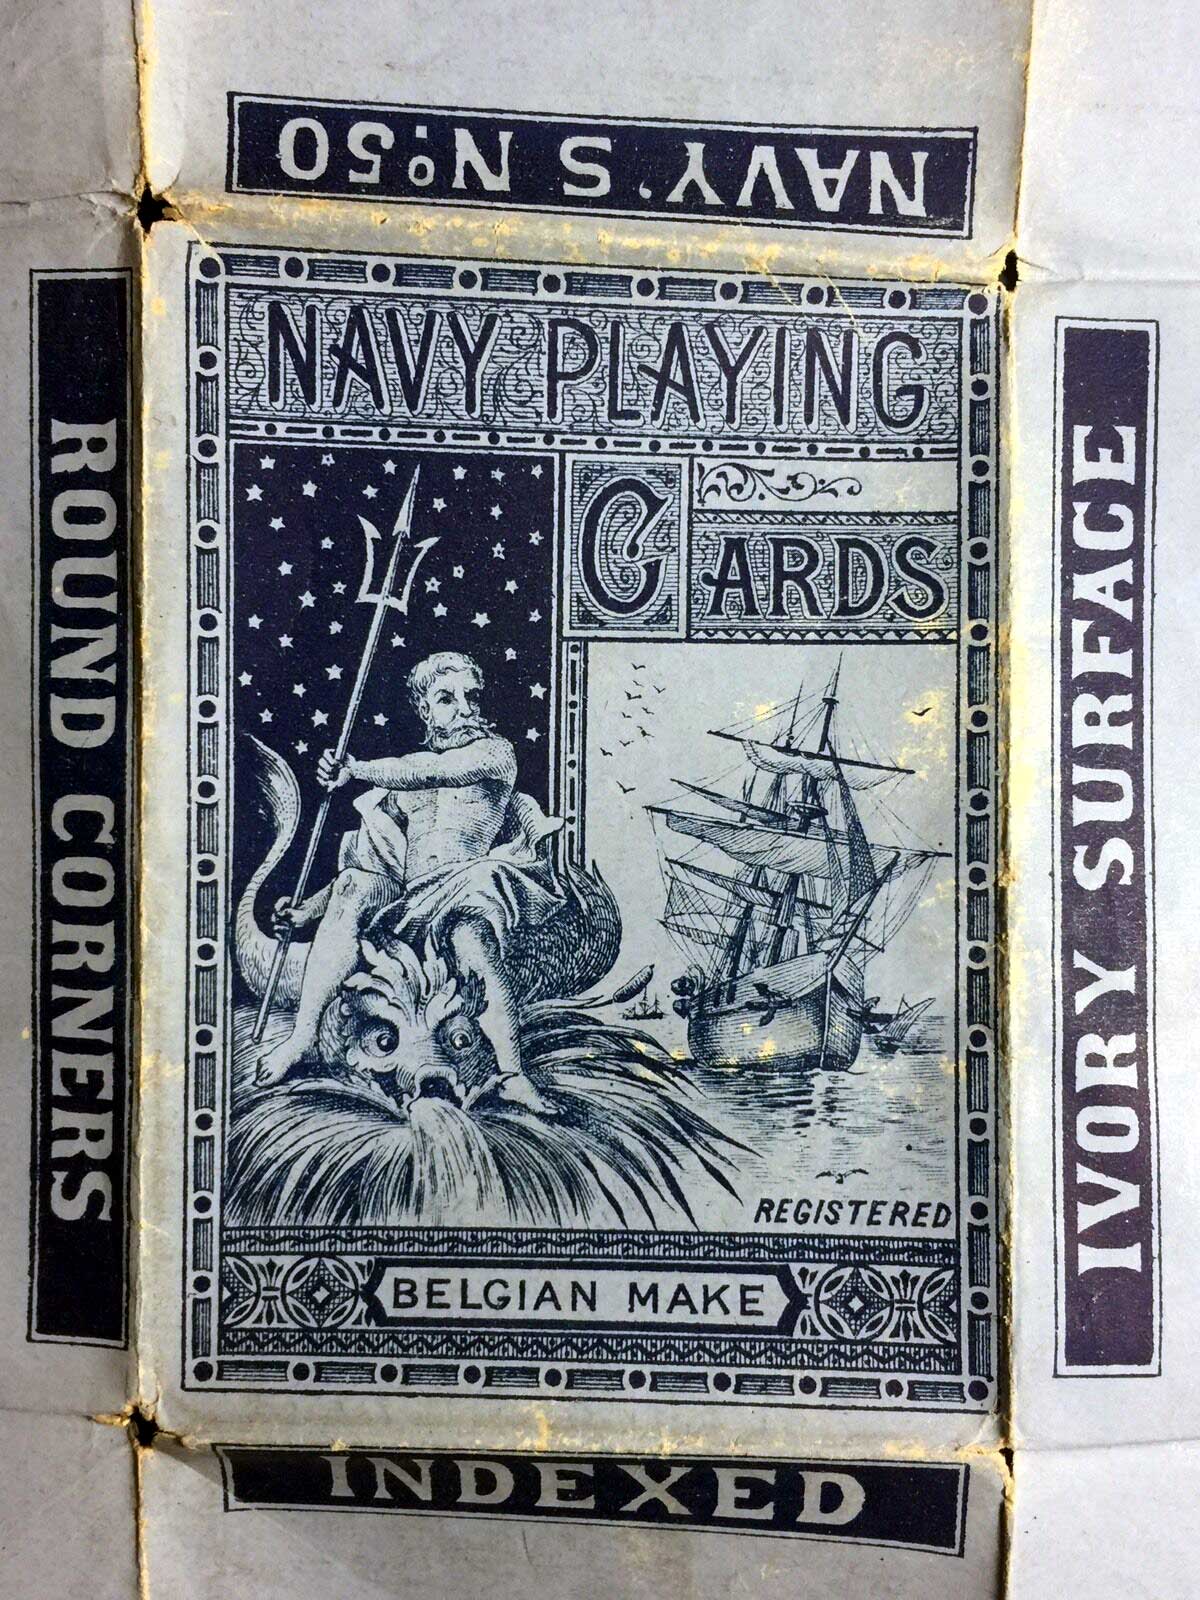 wrapper from Navy's No.50 playing cards manufactured by A. van Genechten